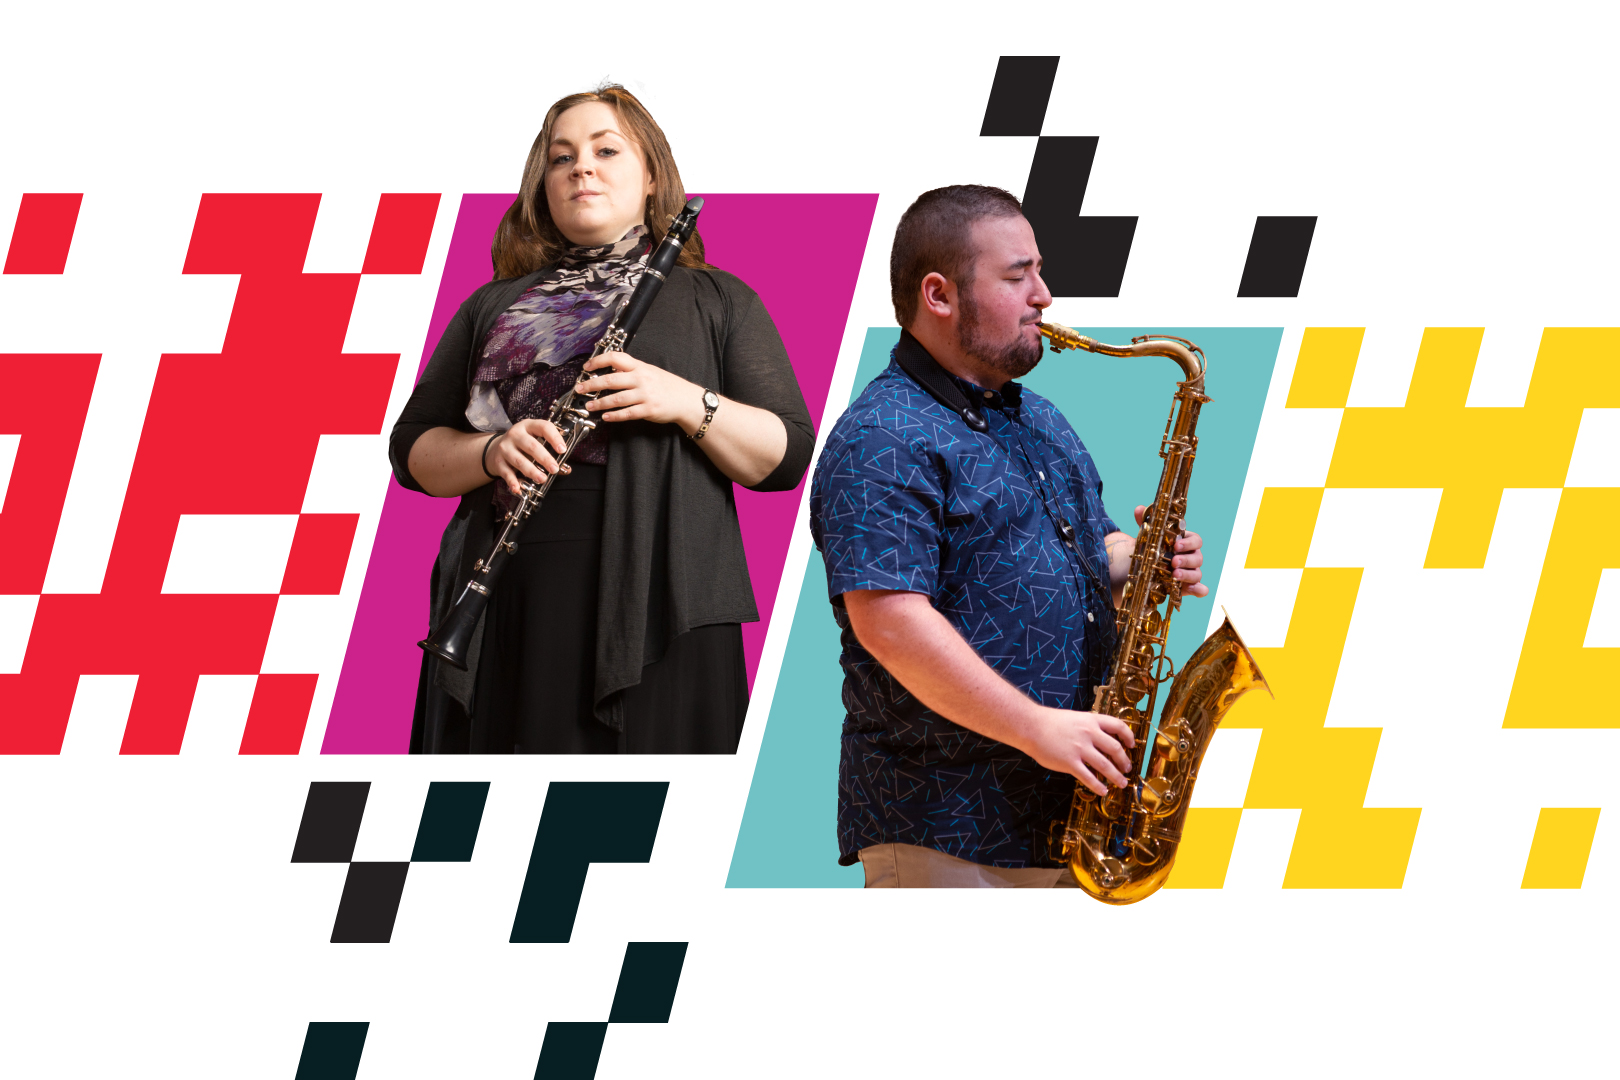 A clarinetist and a saxophonist are featured in a colorful graphic.